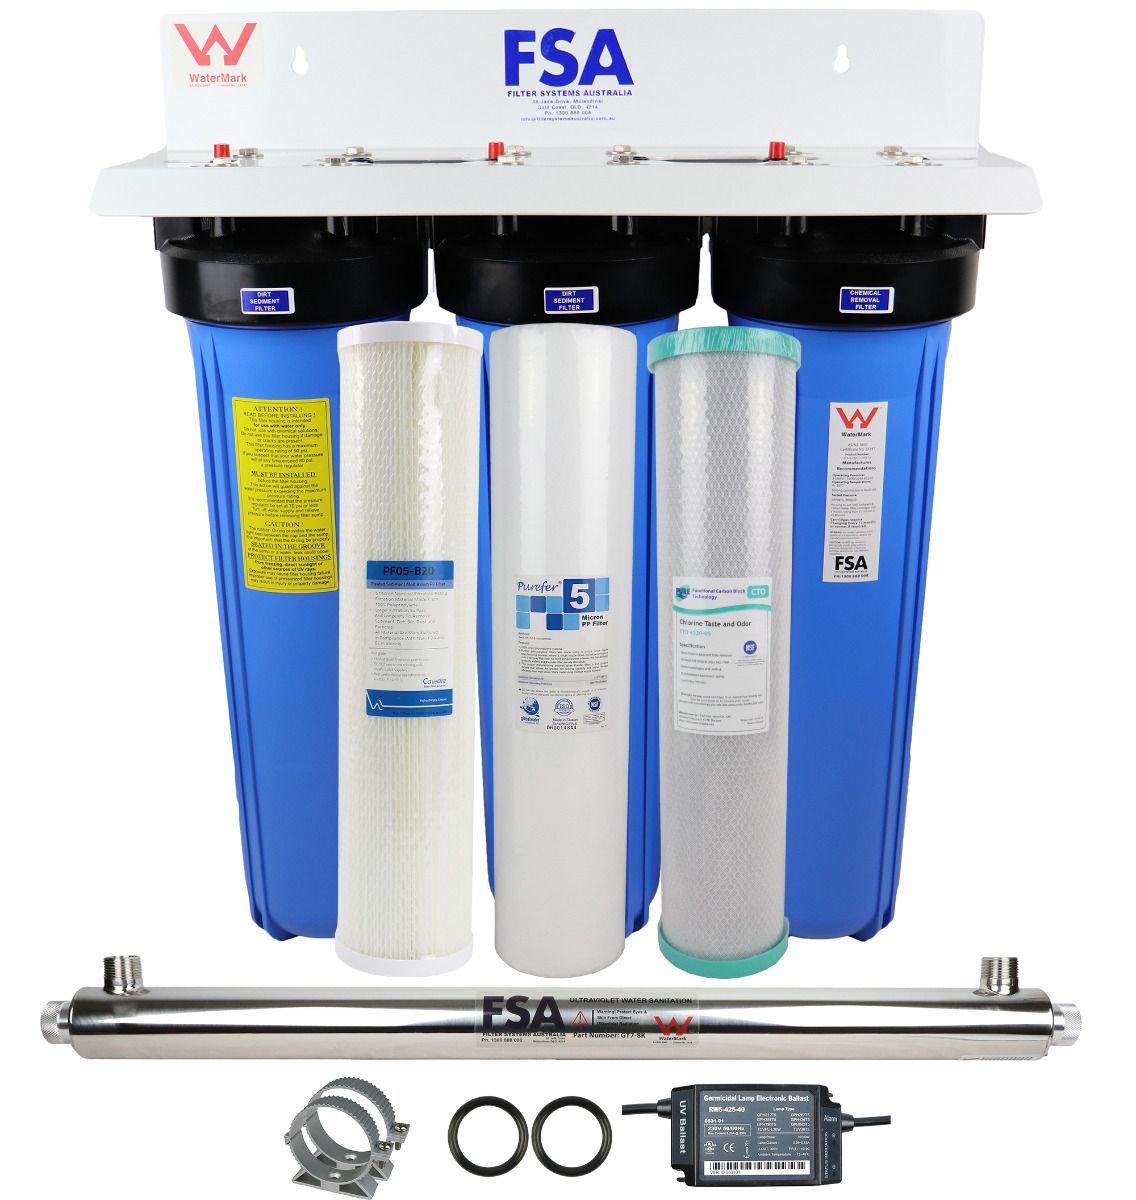 Triple Whole House Rain/Tank Water Filter System